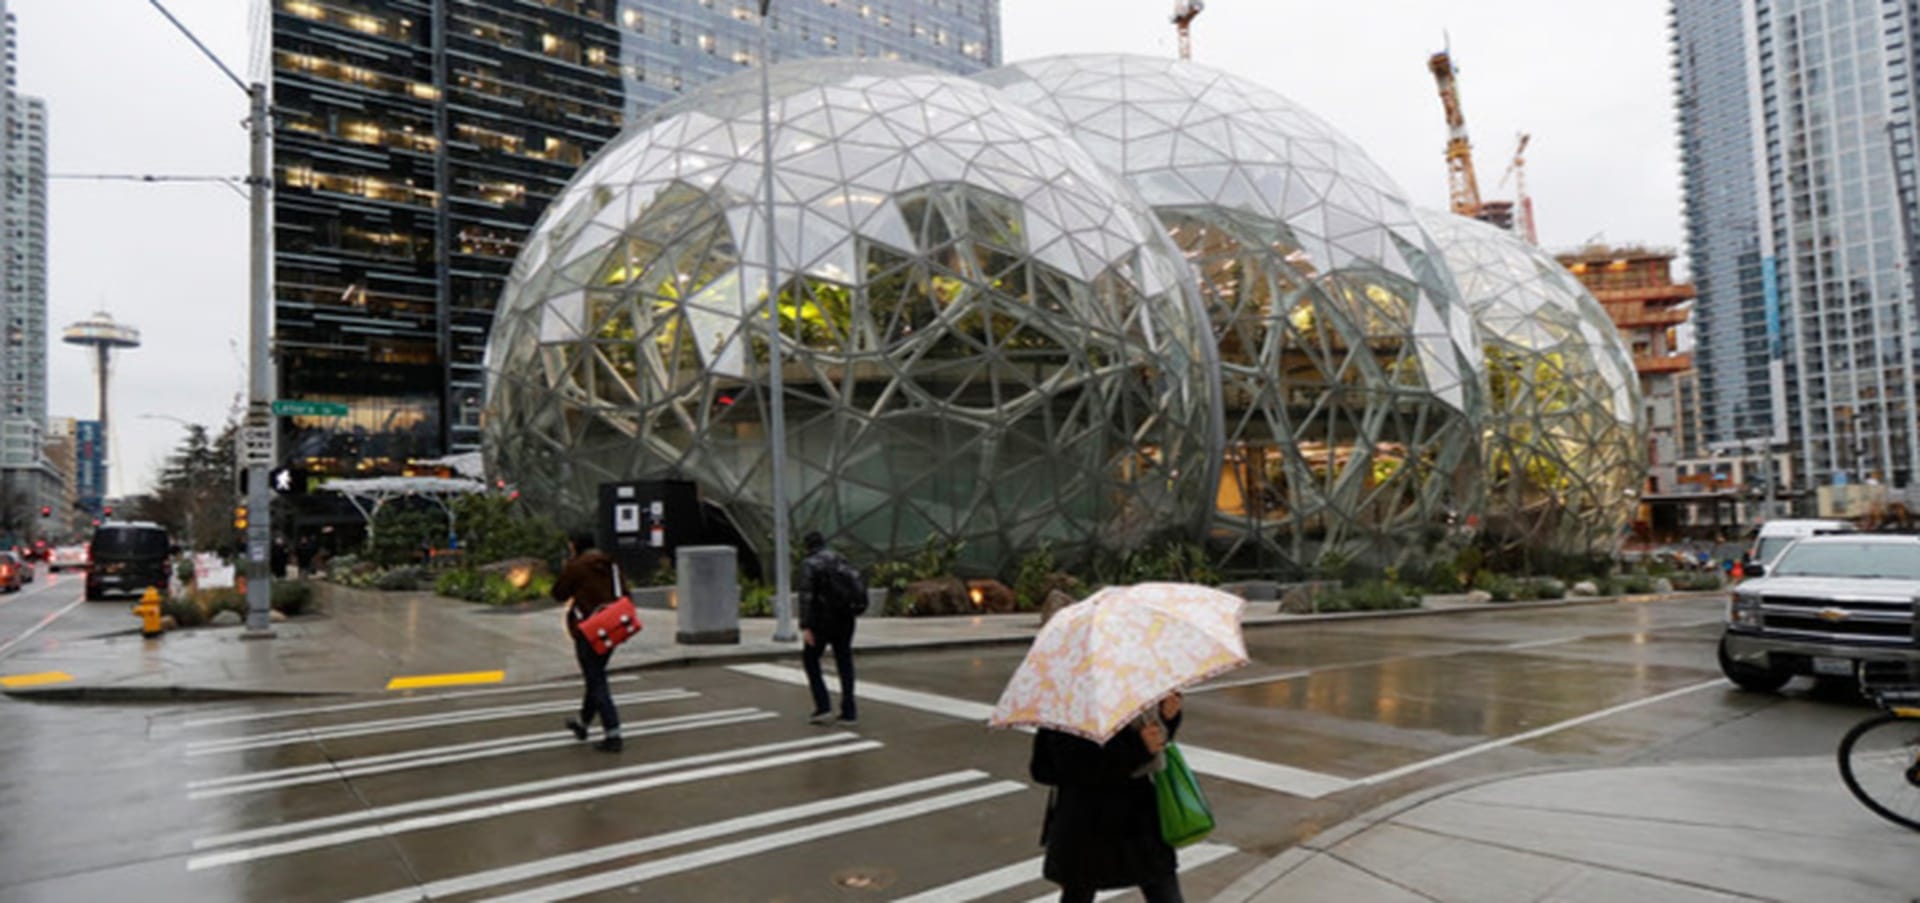 The Amazon Spheres are the visual symbol of Amazon’s downtown Seattle campus.